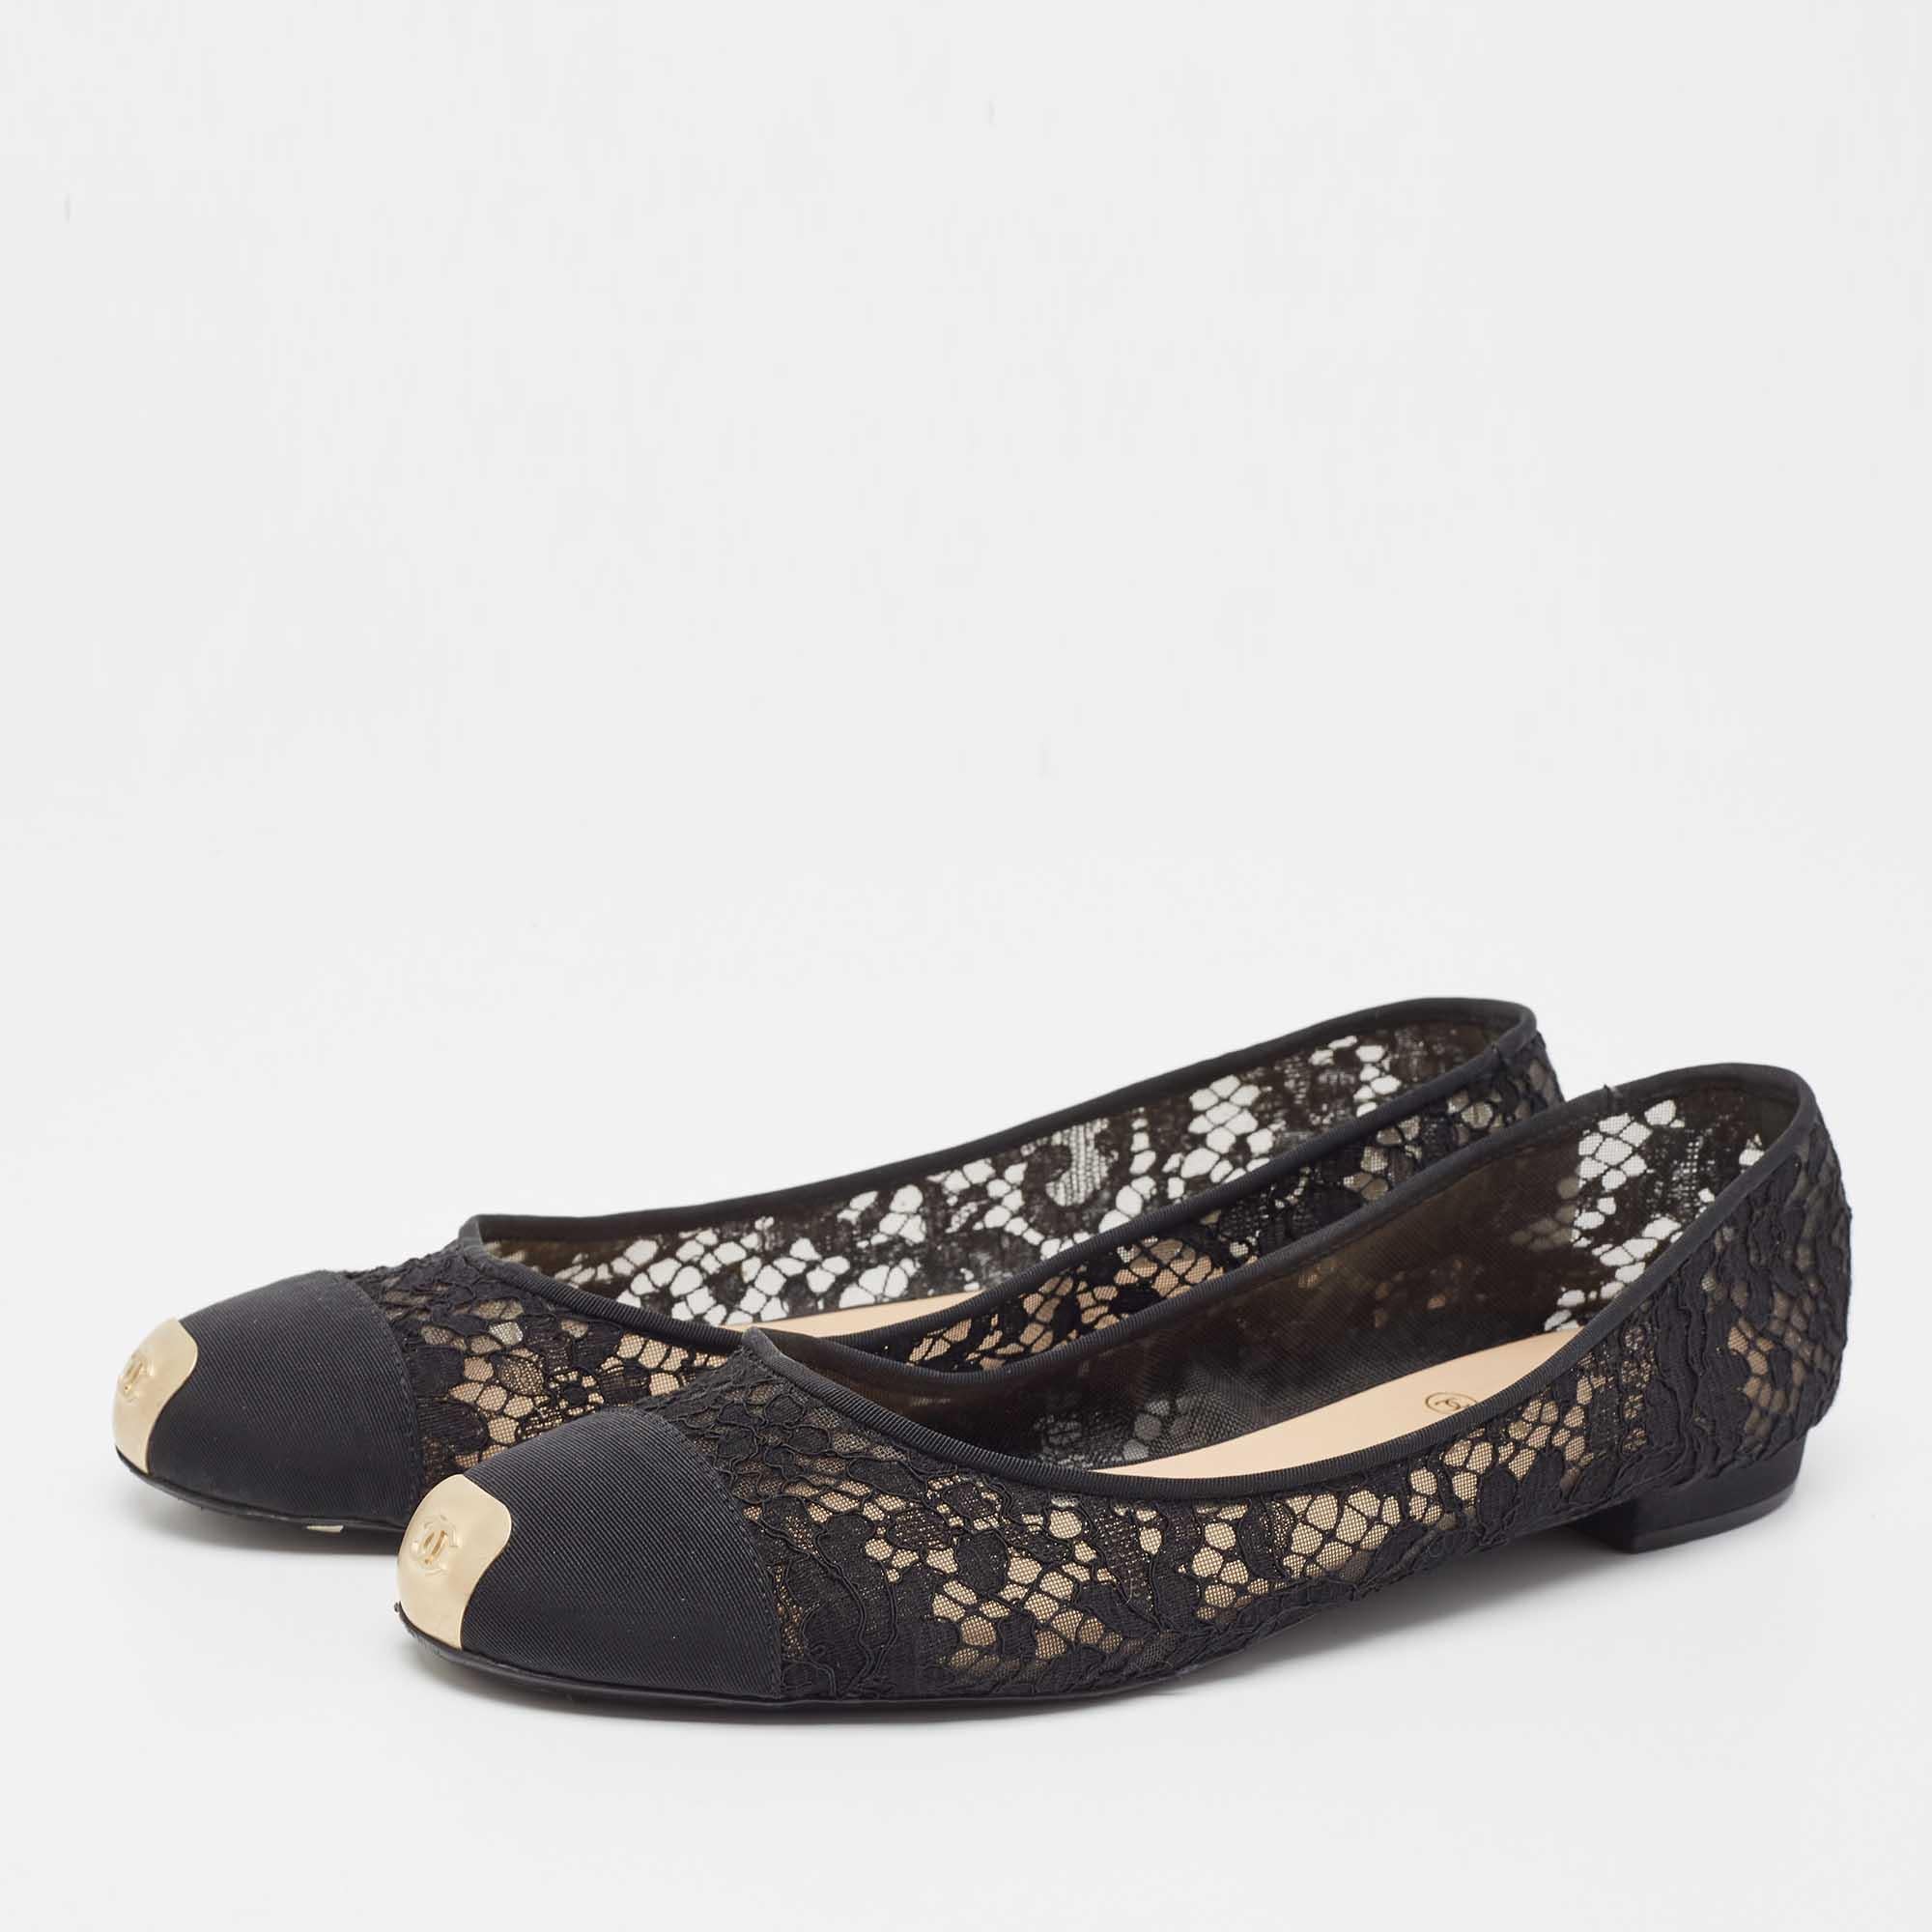 Complete your look by adding these Chanel black ballet flats to your lovely wardrobe. They are crafted skilfully to grant the perfect fit and style.

